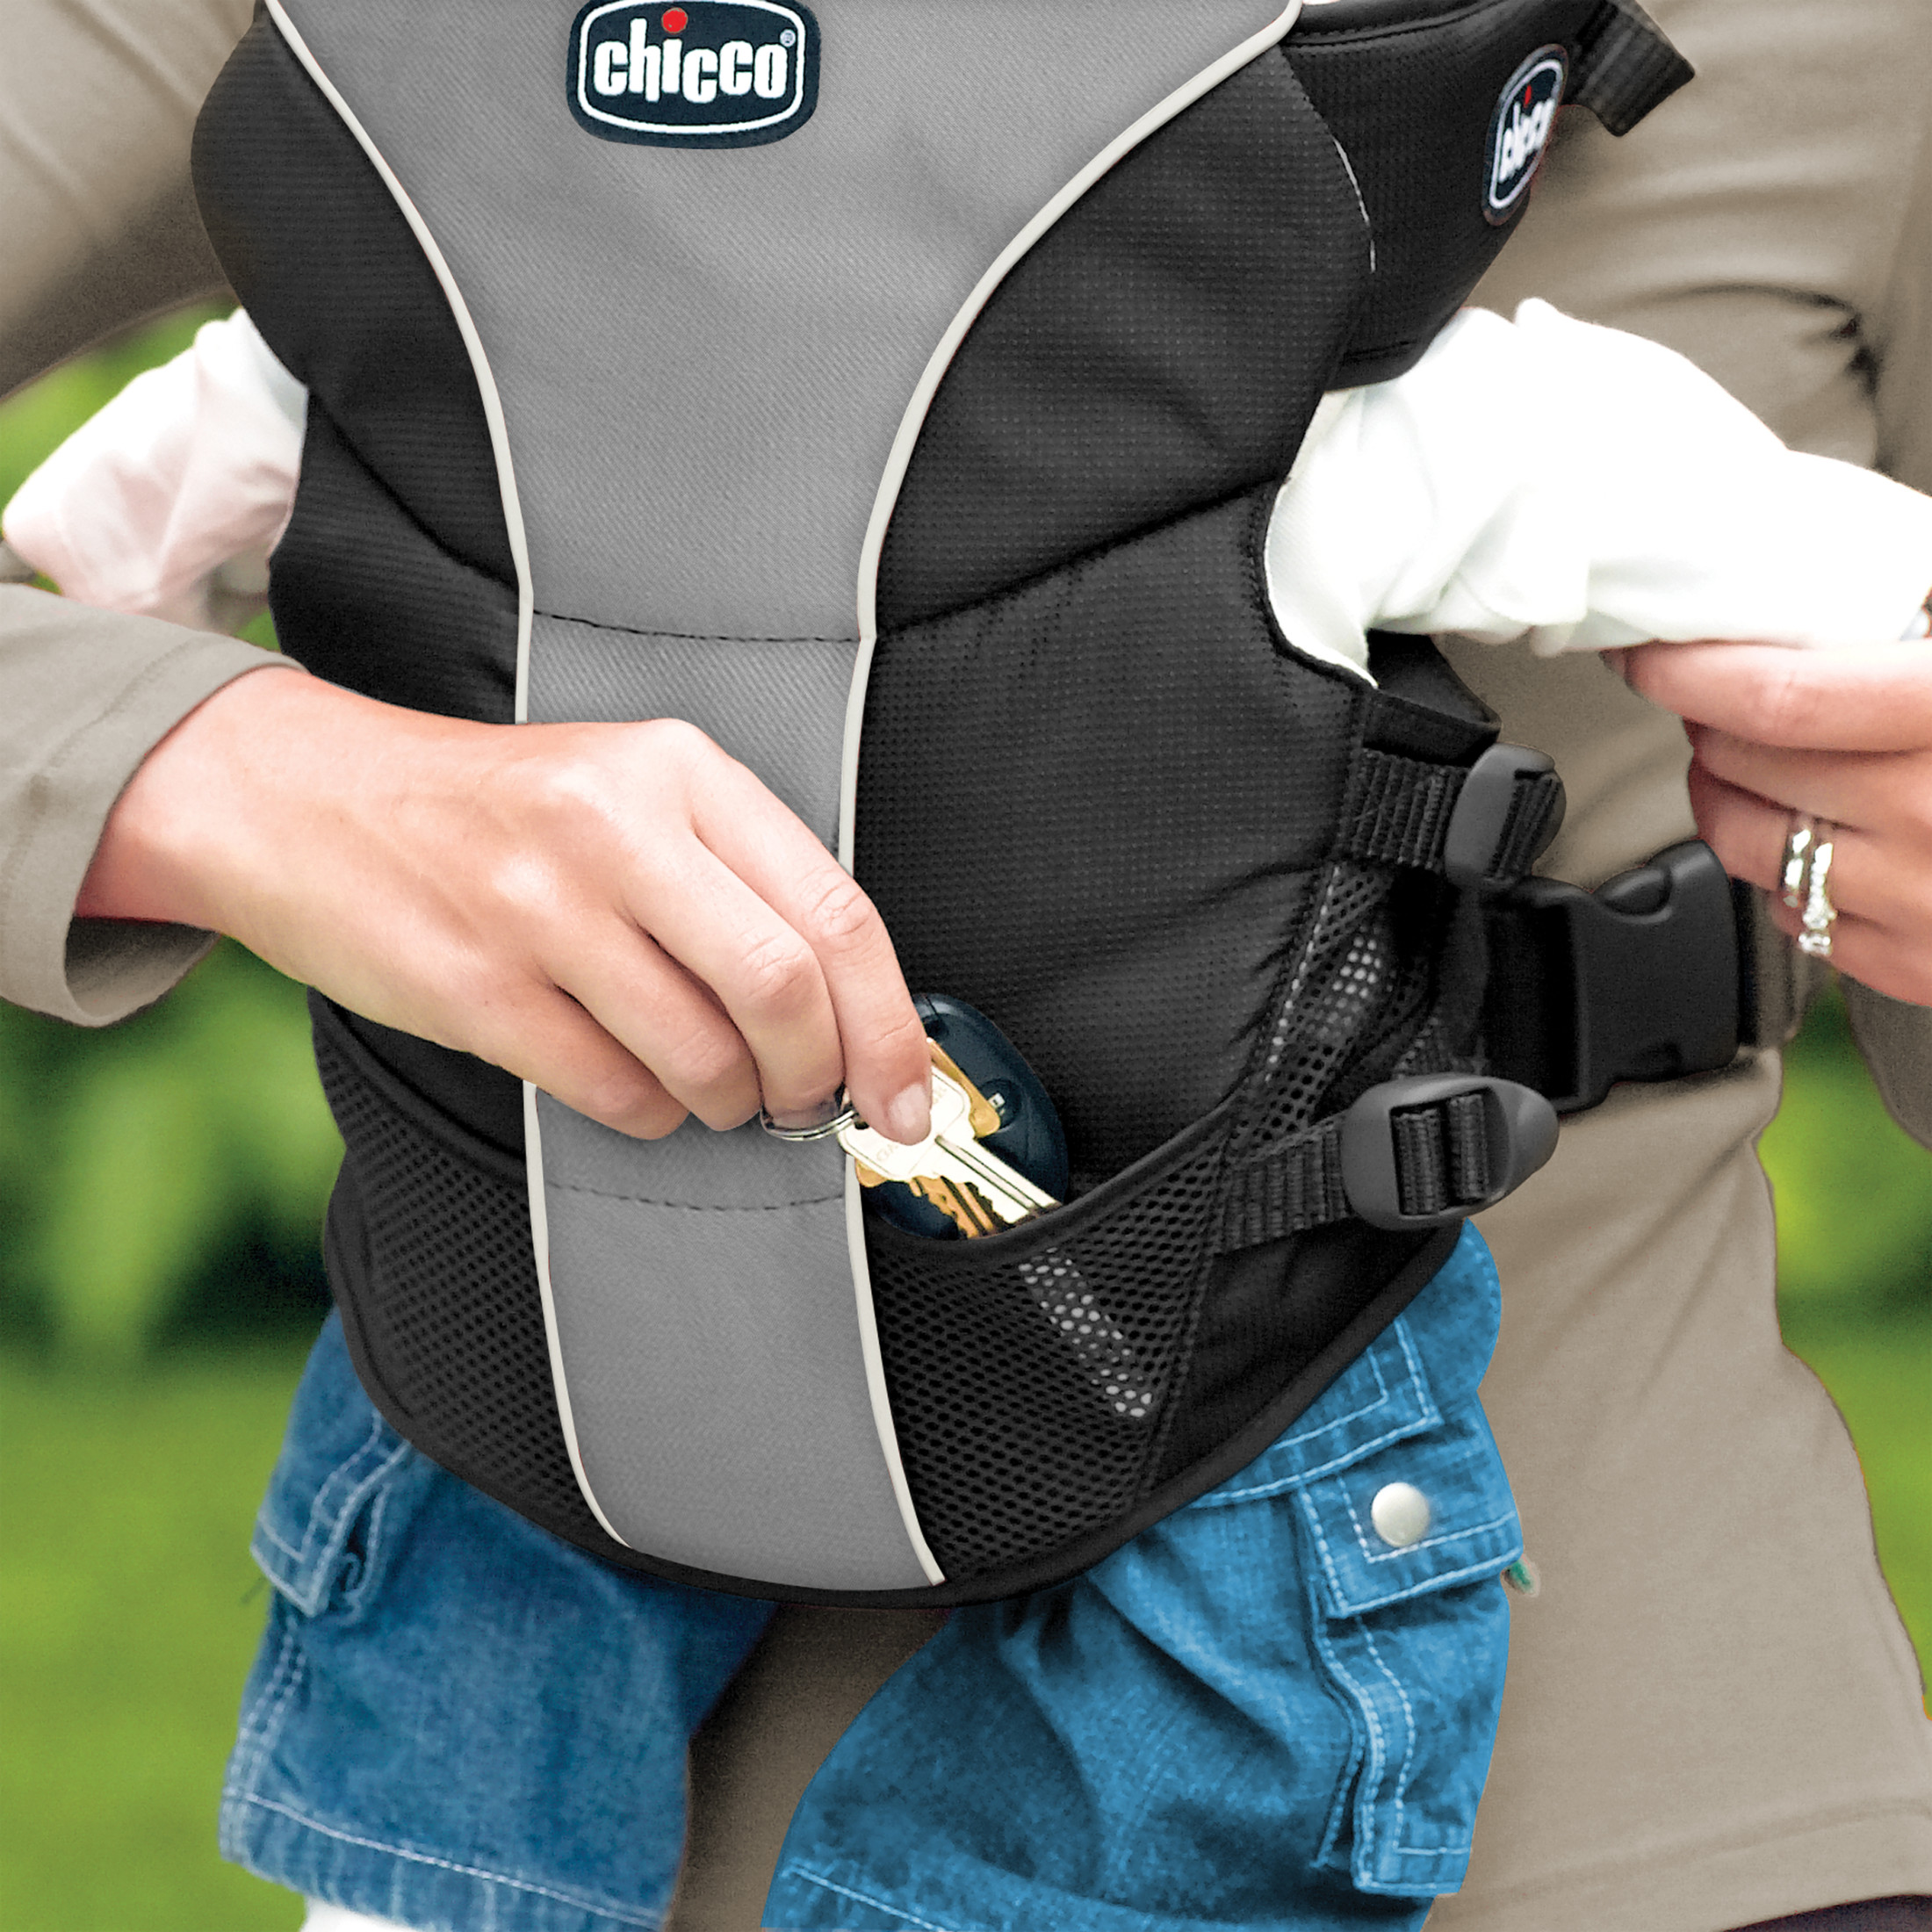 Chicco UltraSoft Infant Carrier - Poetic () - image 4 of 8